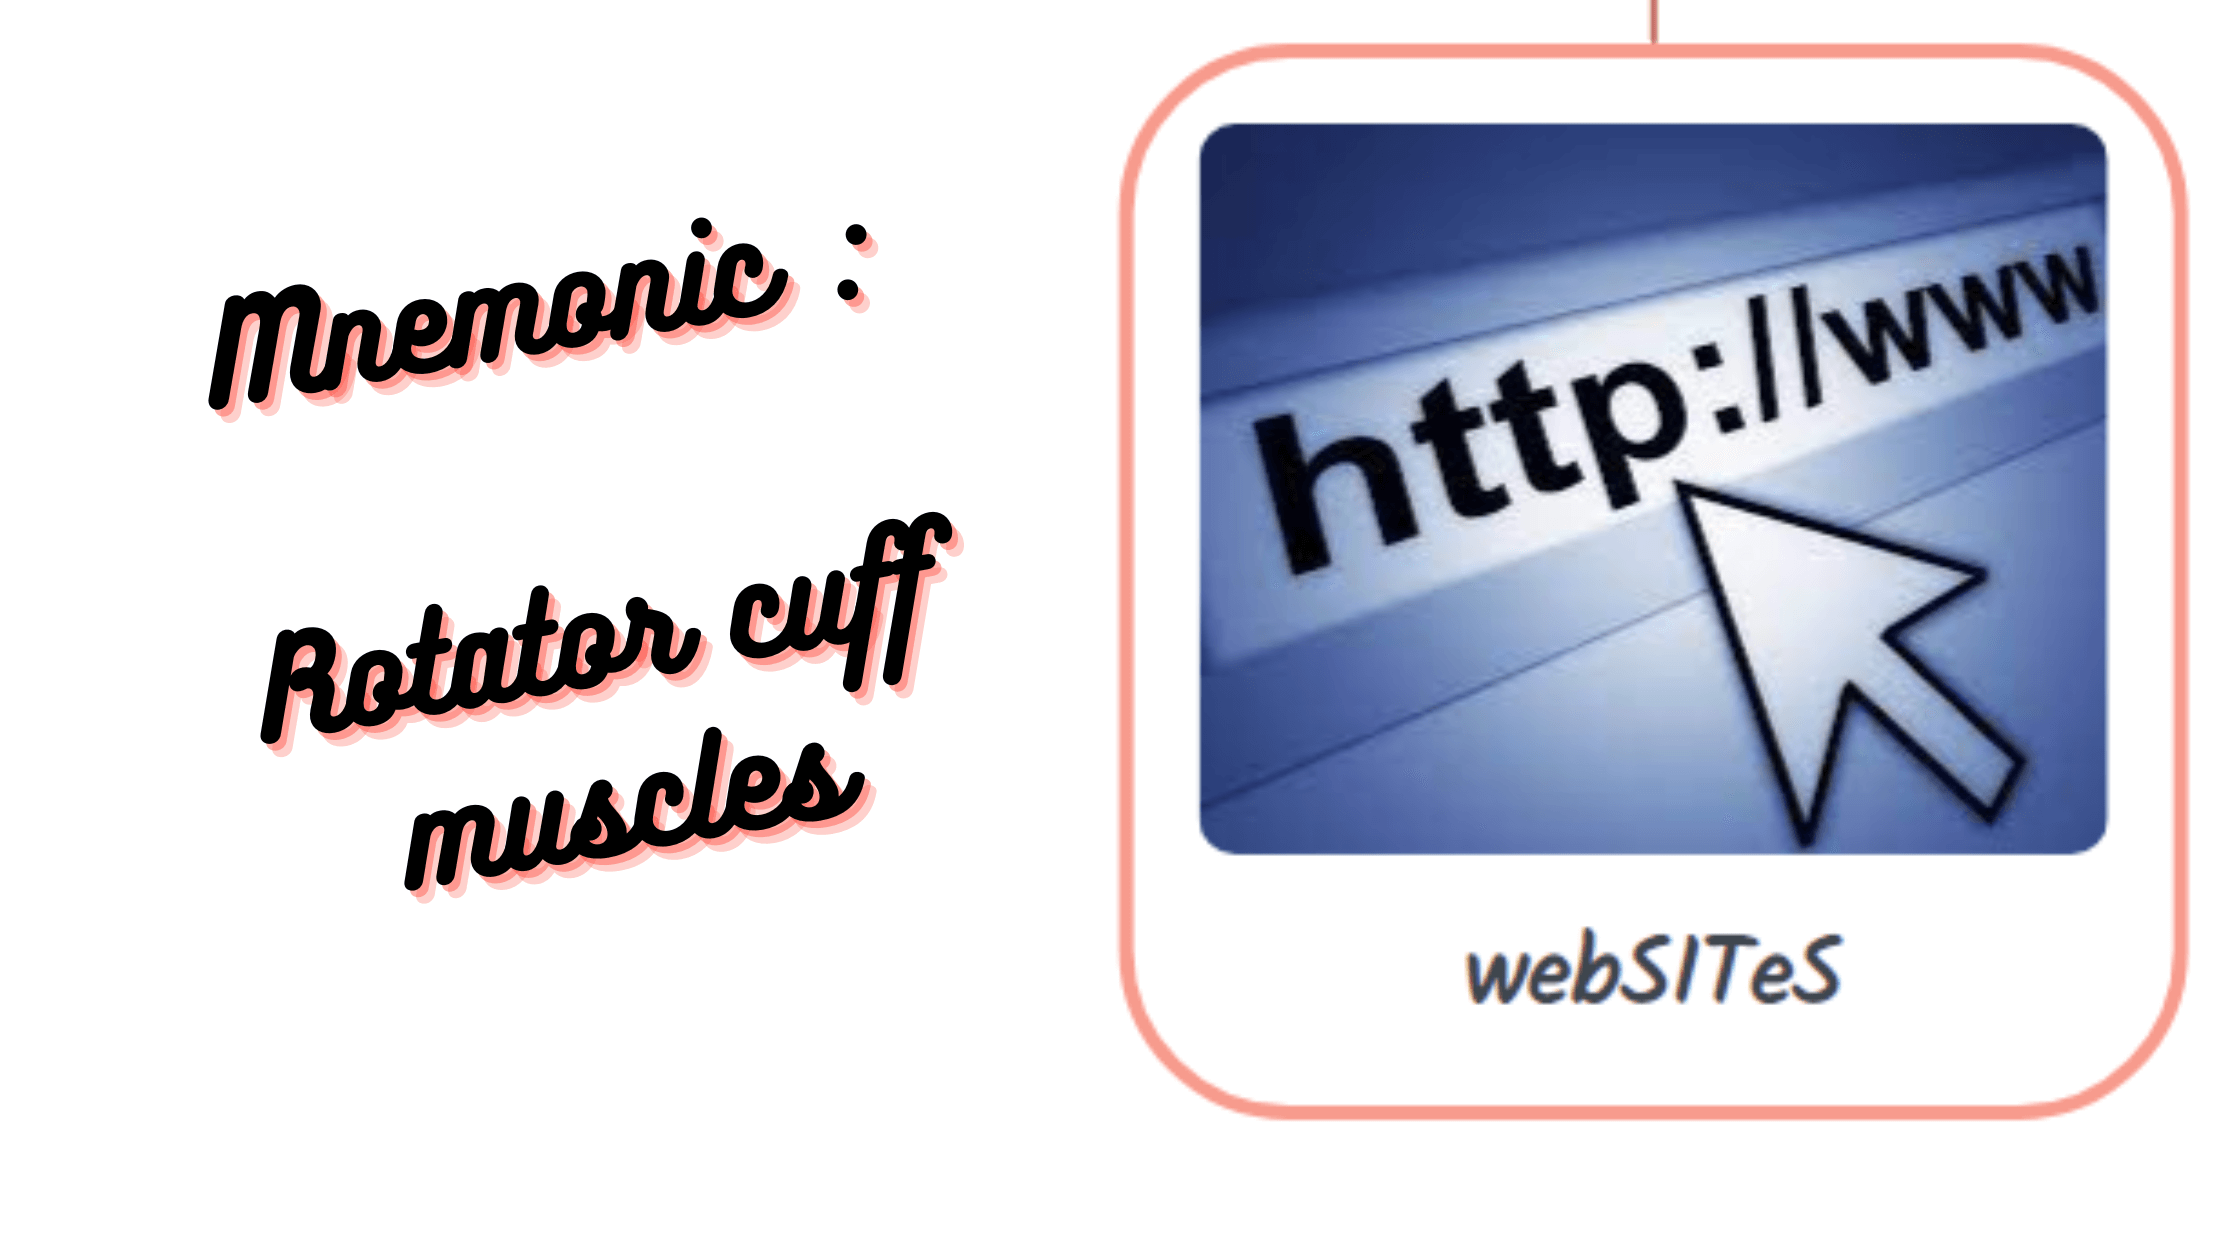 Mnemonic _ Rotator cuff muscles Medical notes for NExT medical exit test